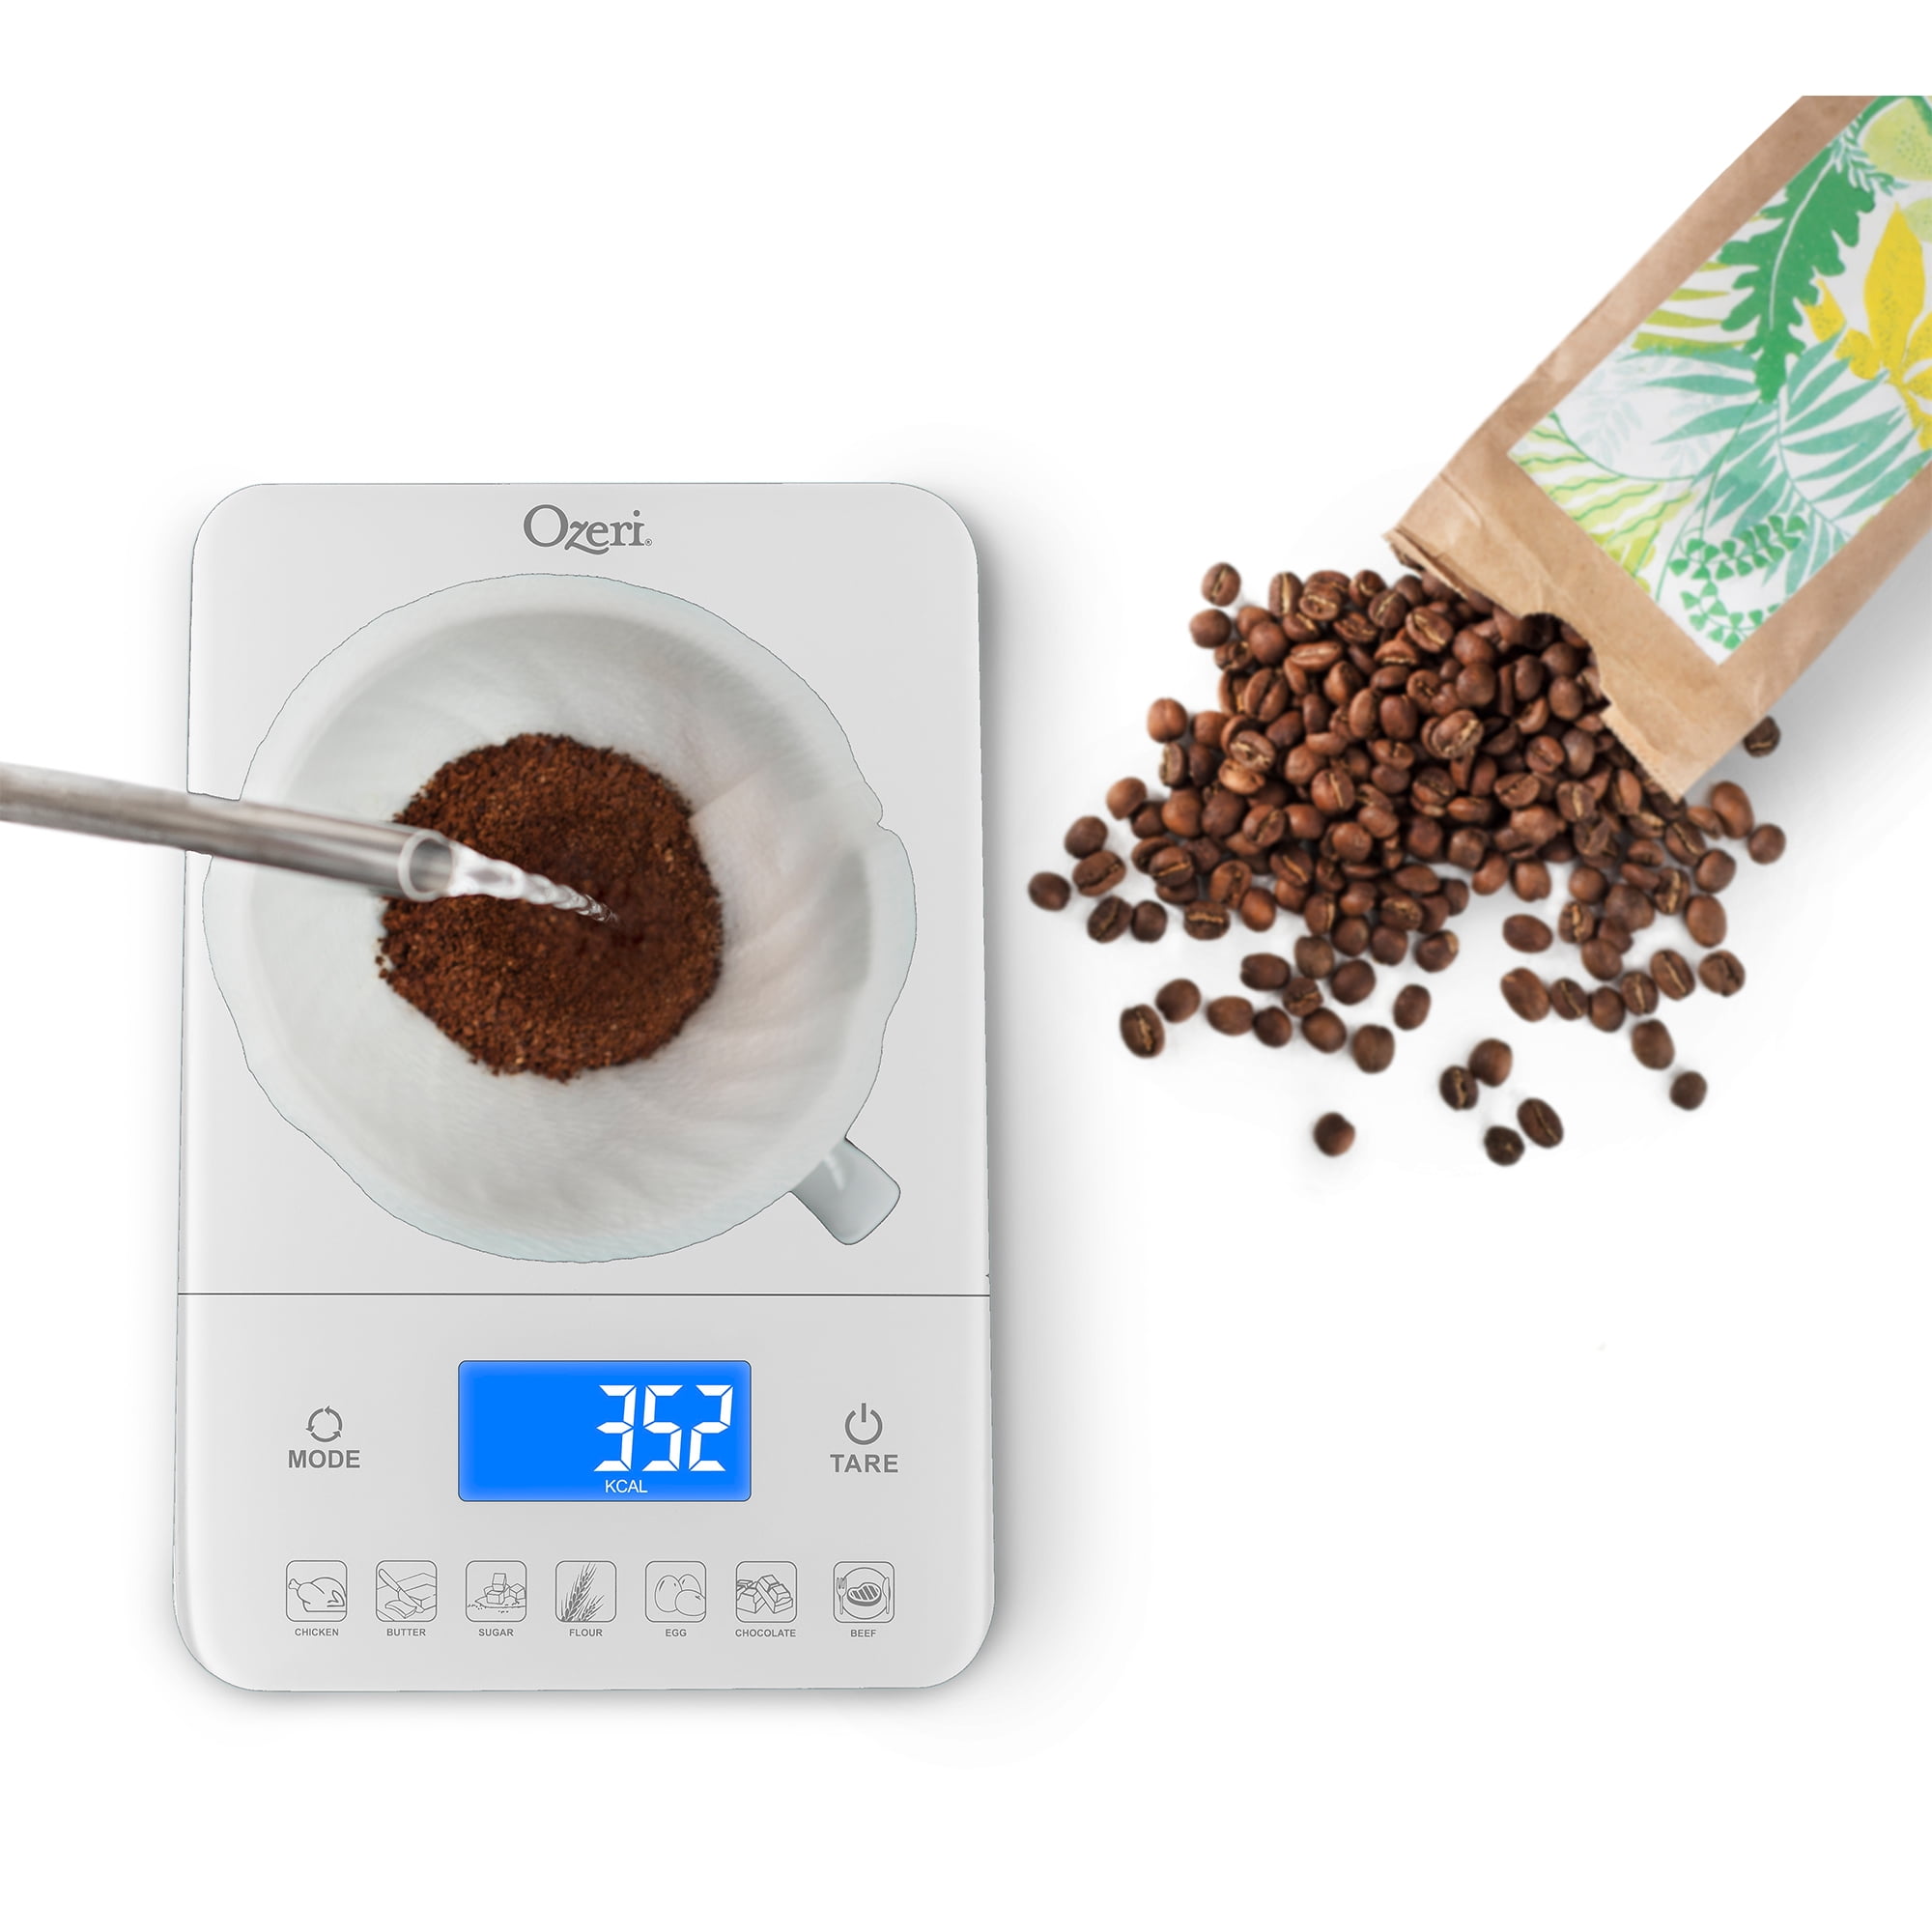  Ozeri Touch III 22 lbs (10 kg) Digital Kitchen Scale with Calorie  Counter, in Tempered Glass : Kitchen & Dining